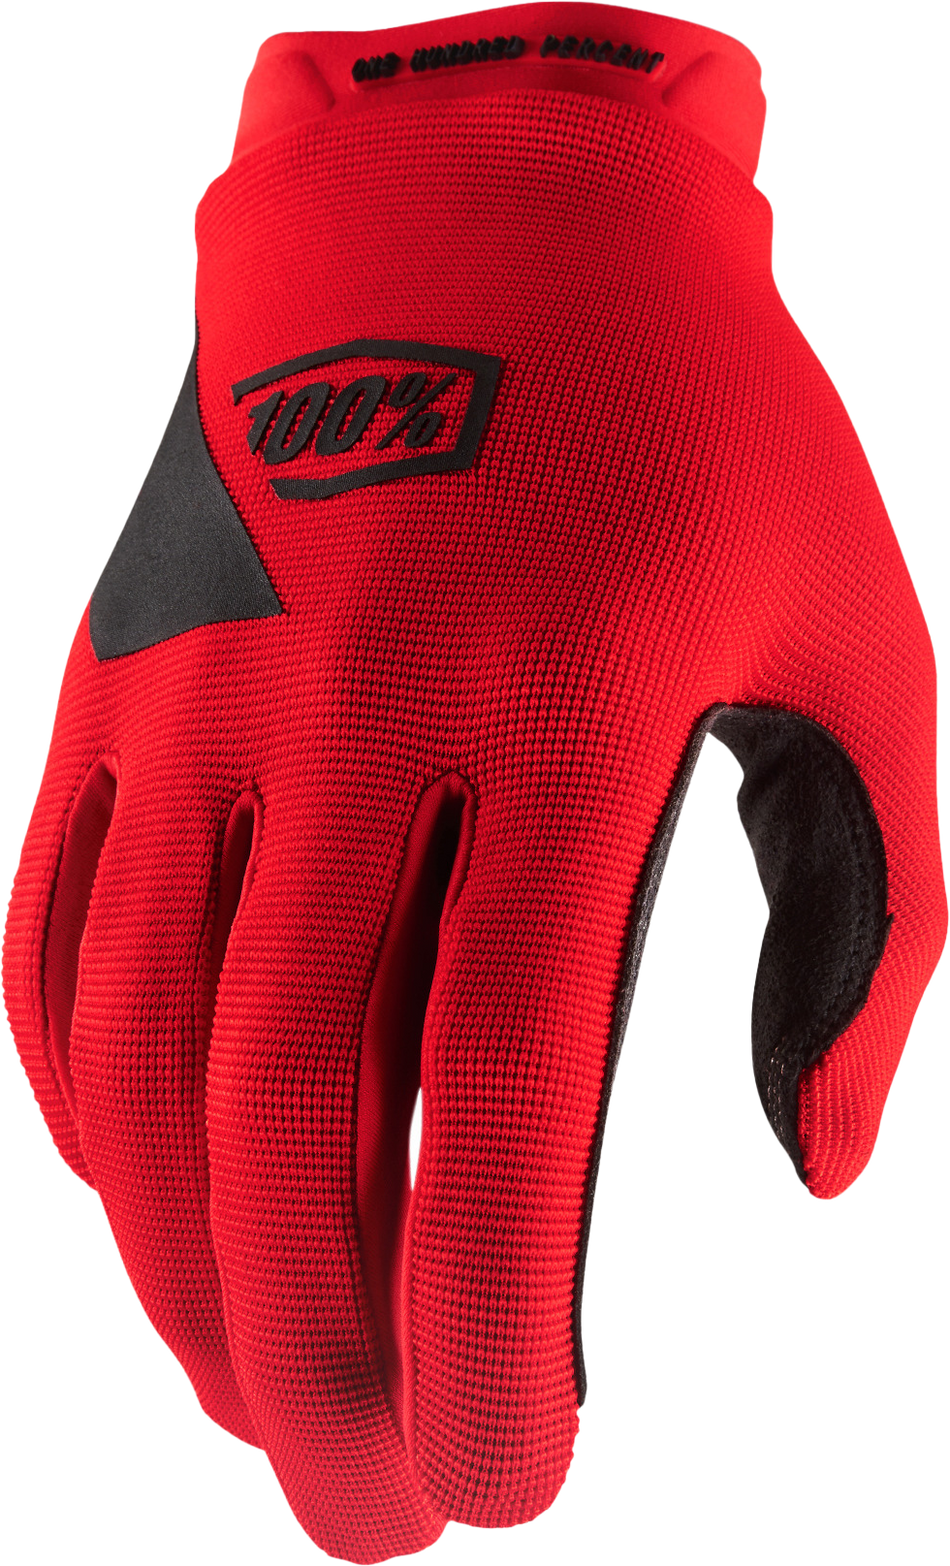 100% Ridecamp Youth Gloves Red Lg 10012-00006